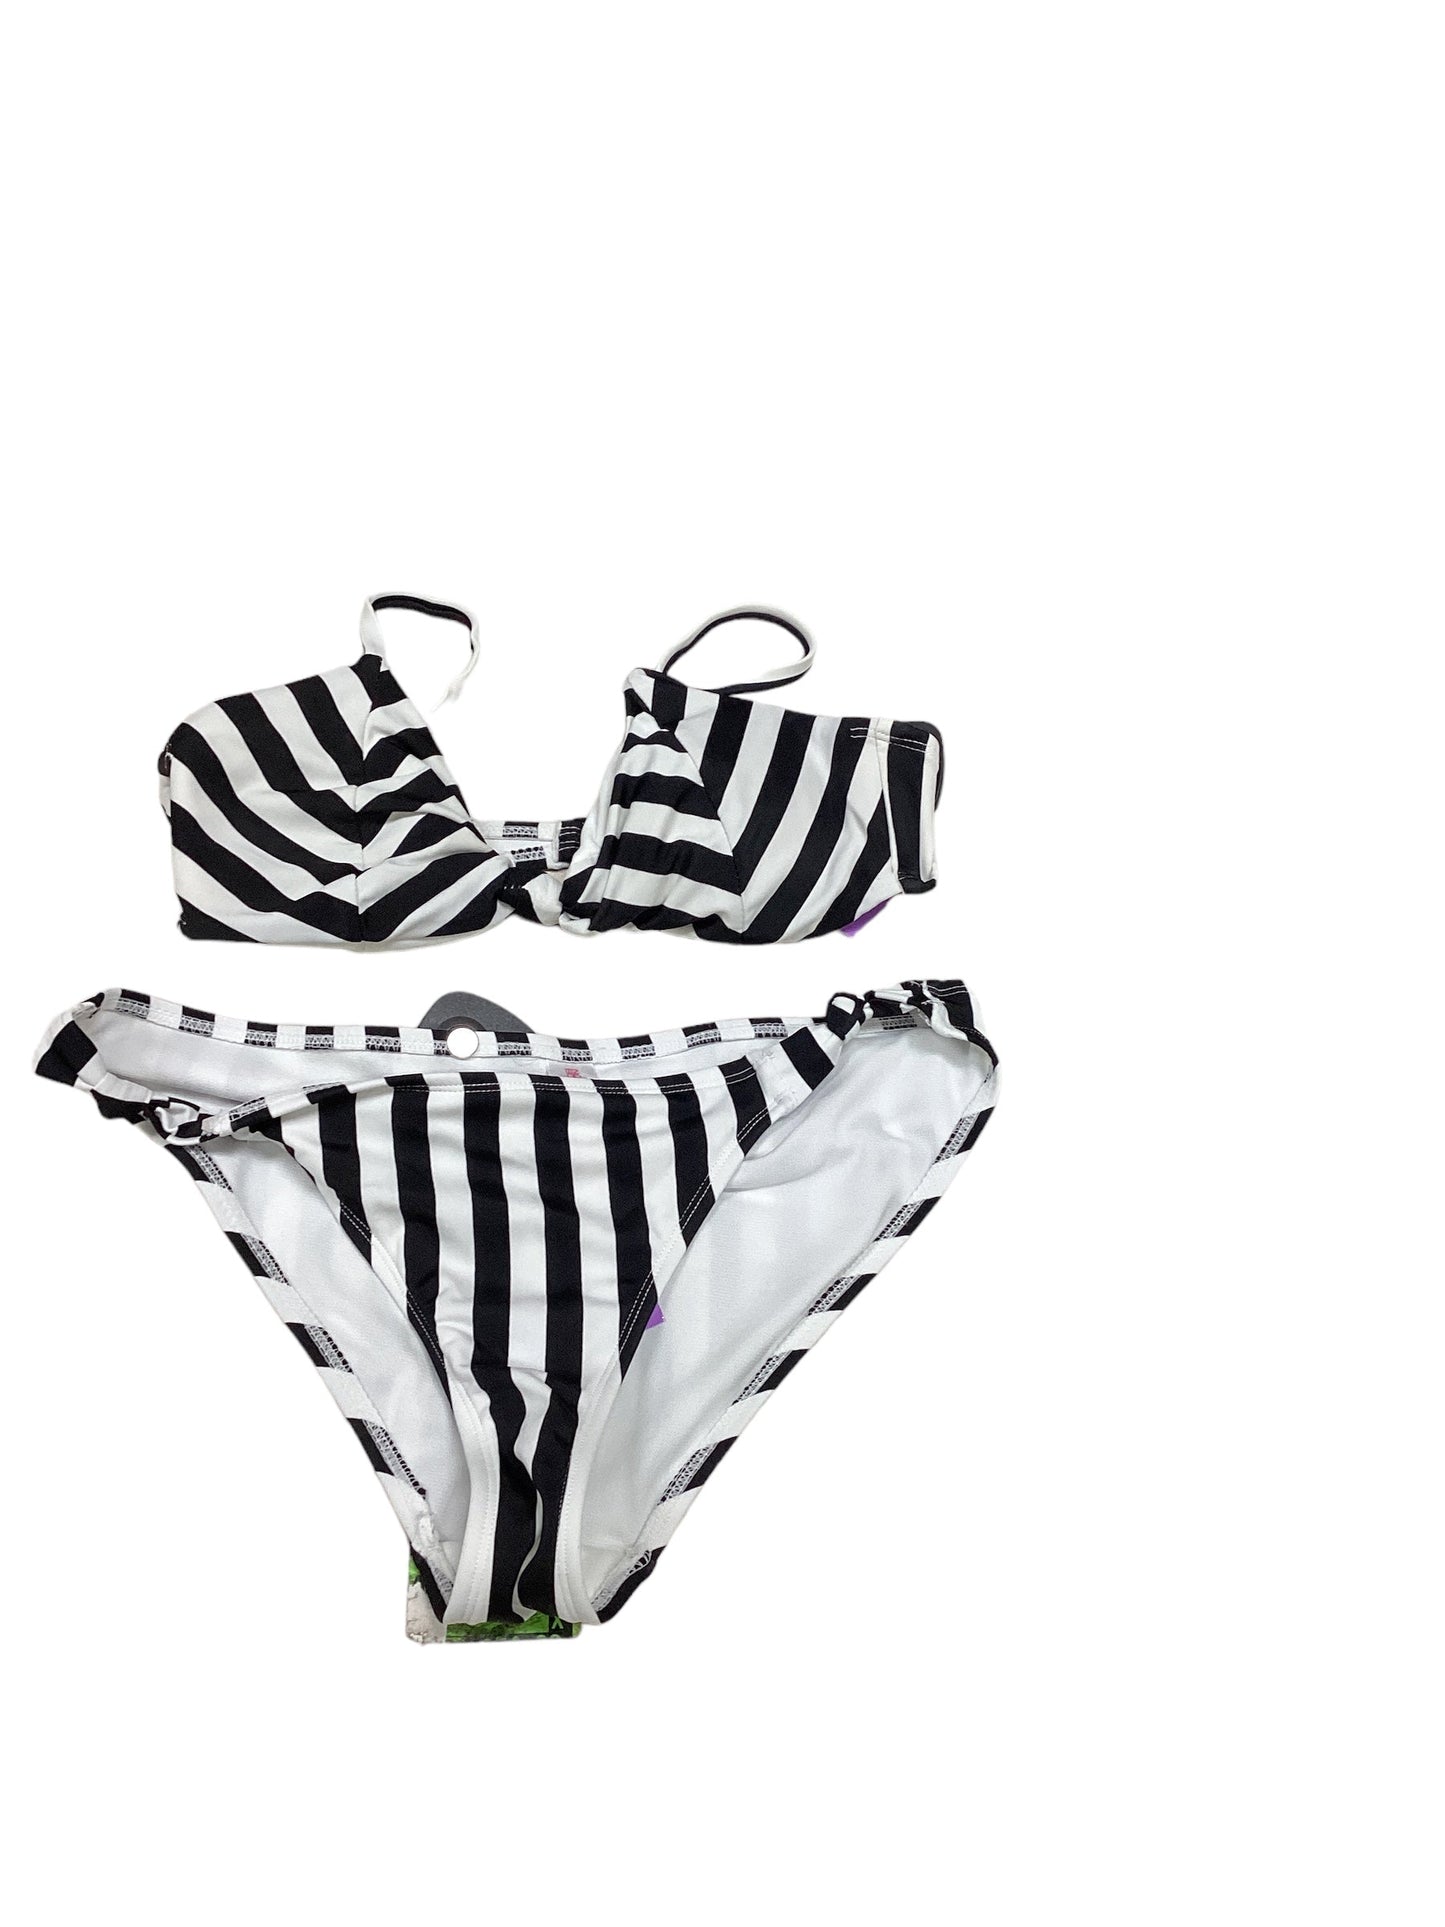 Striped Pattern Swimsuit 2pc Clothes Mentor, Size 7.5